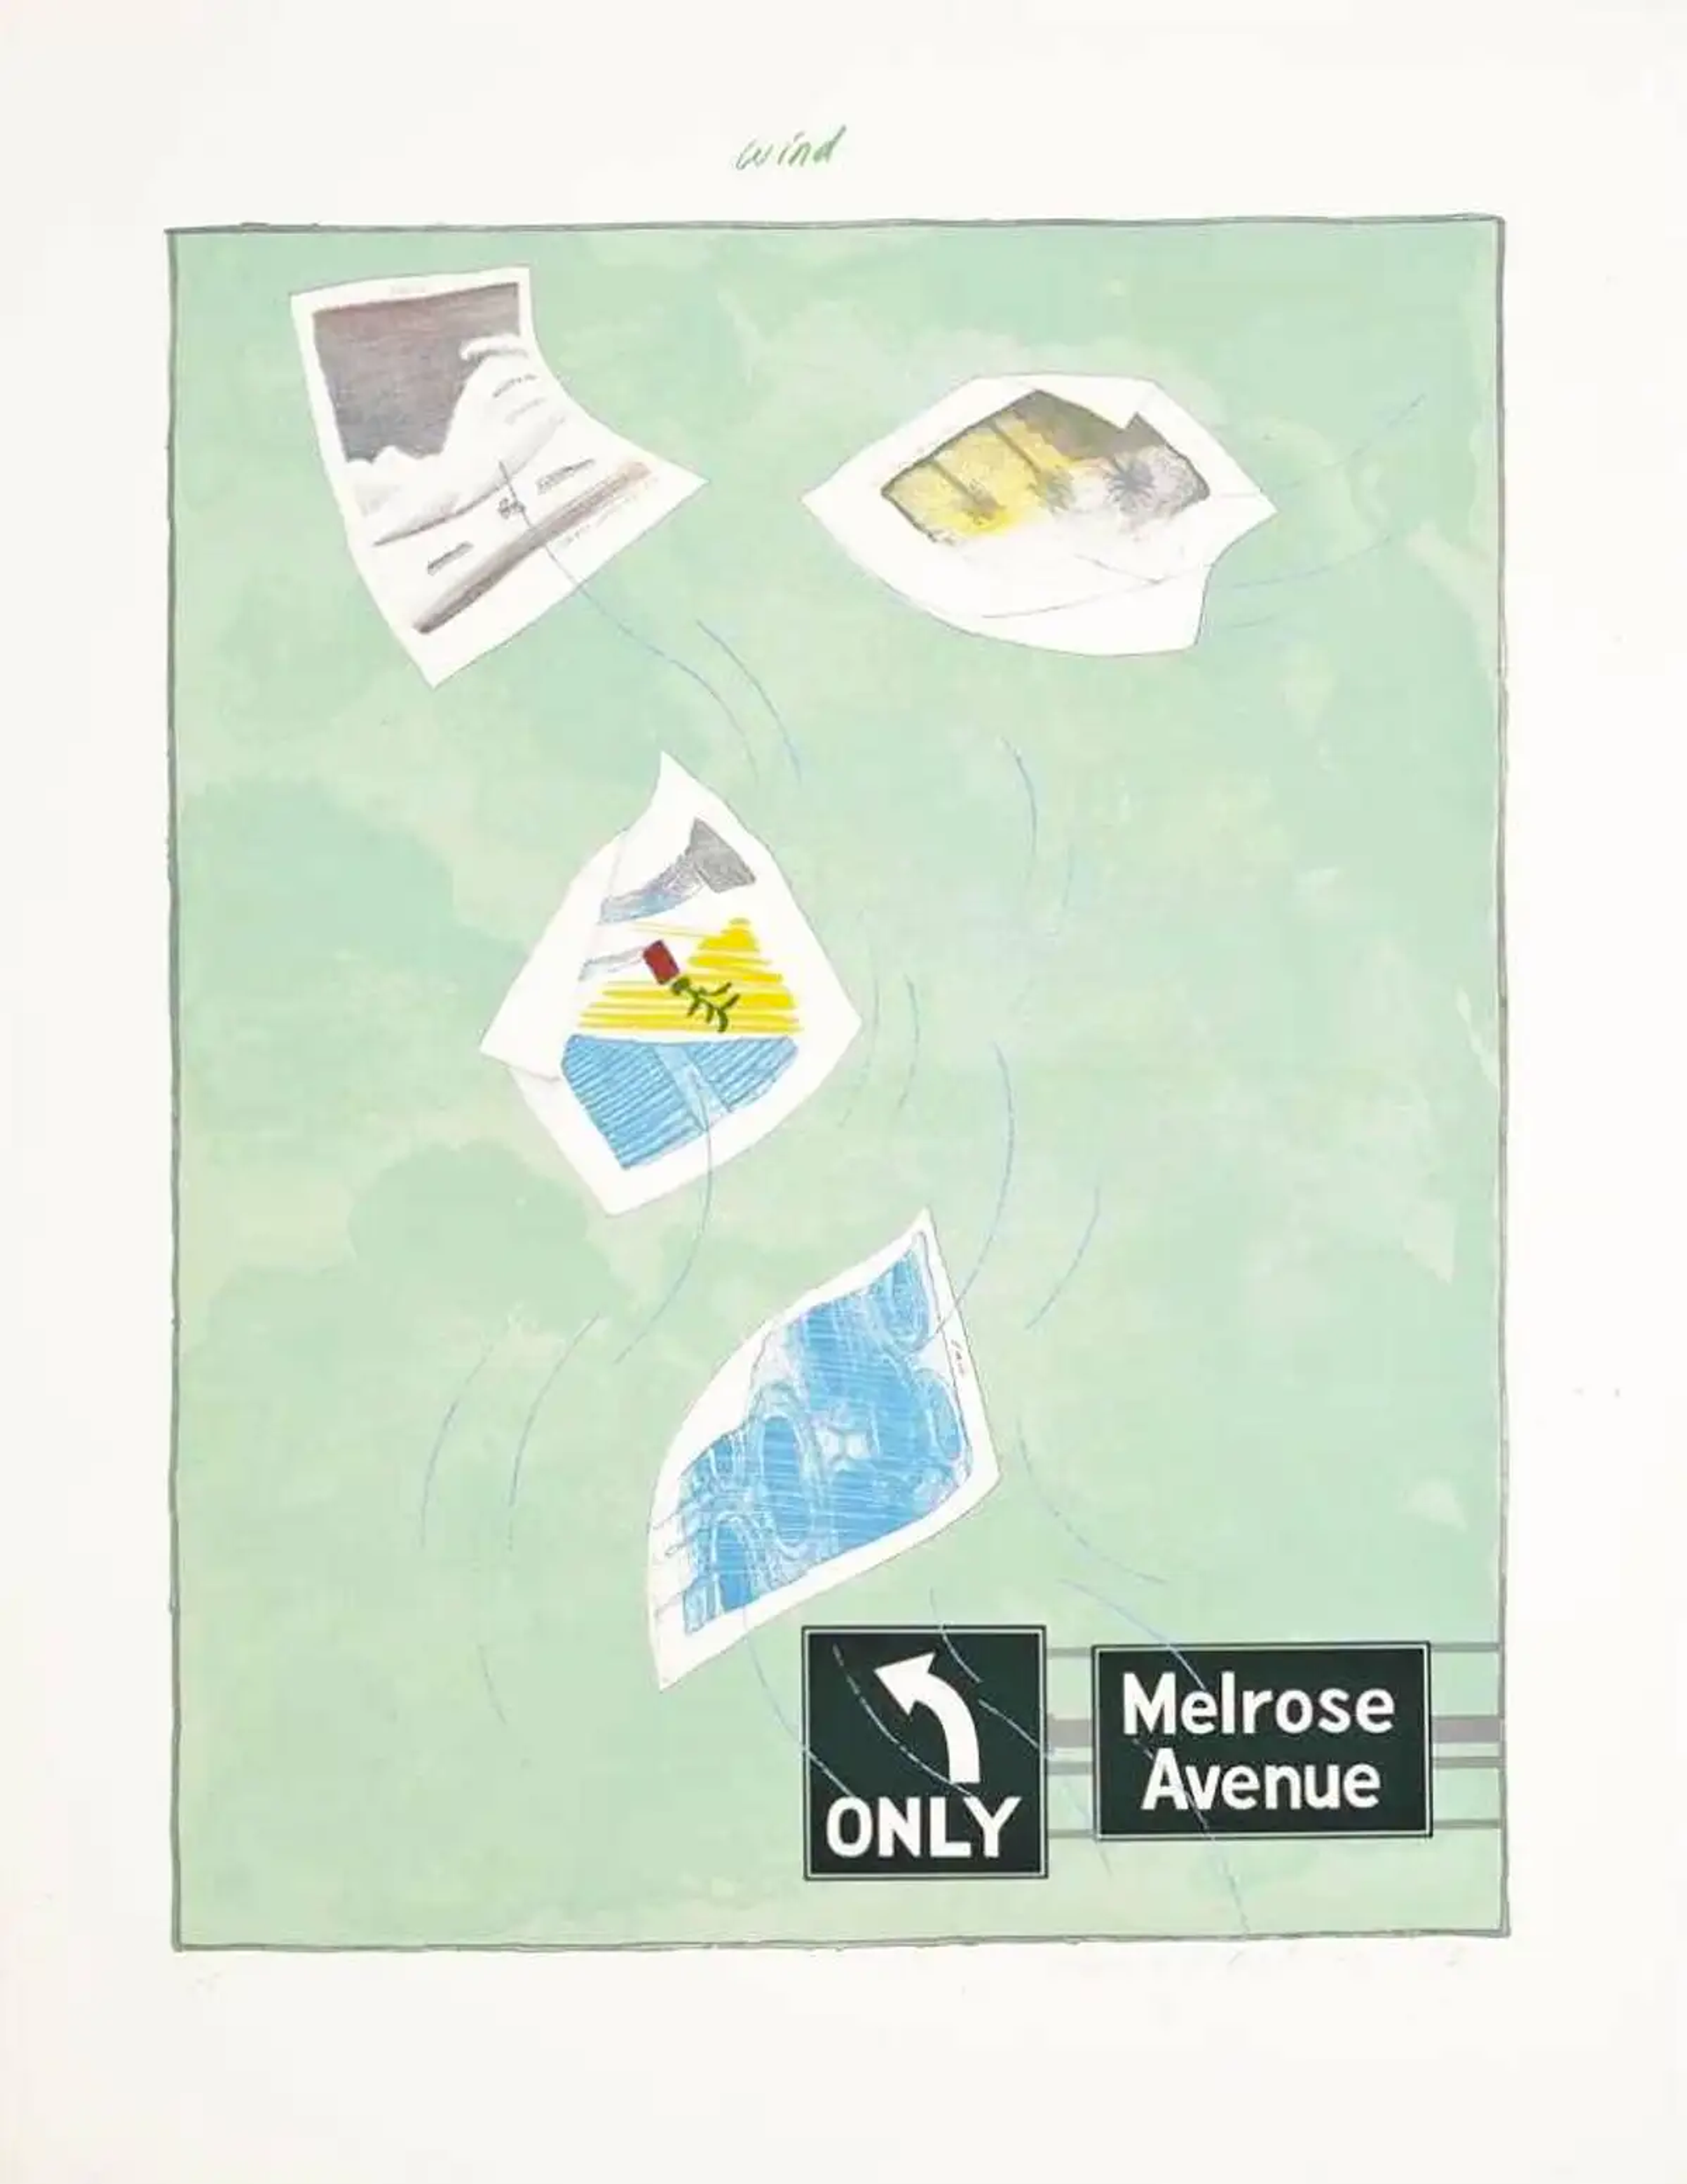 David Hockney's Wind. A print of four works by David Hockney against a light green background with an "Only" and "Melrose Avenue" sign.